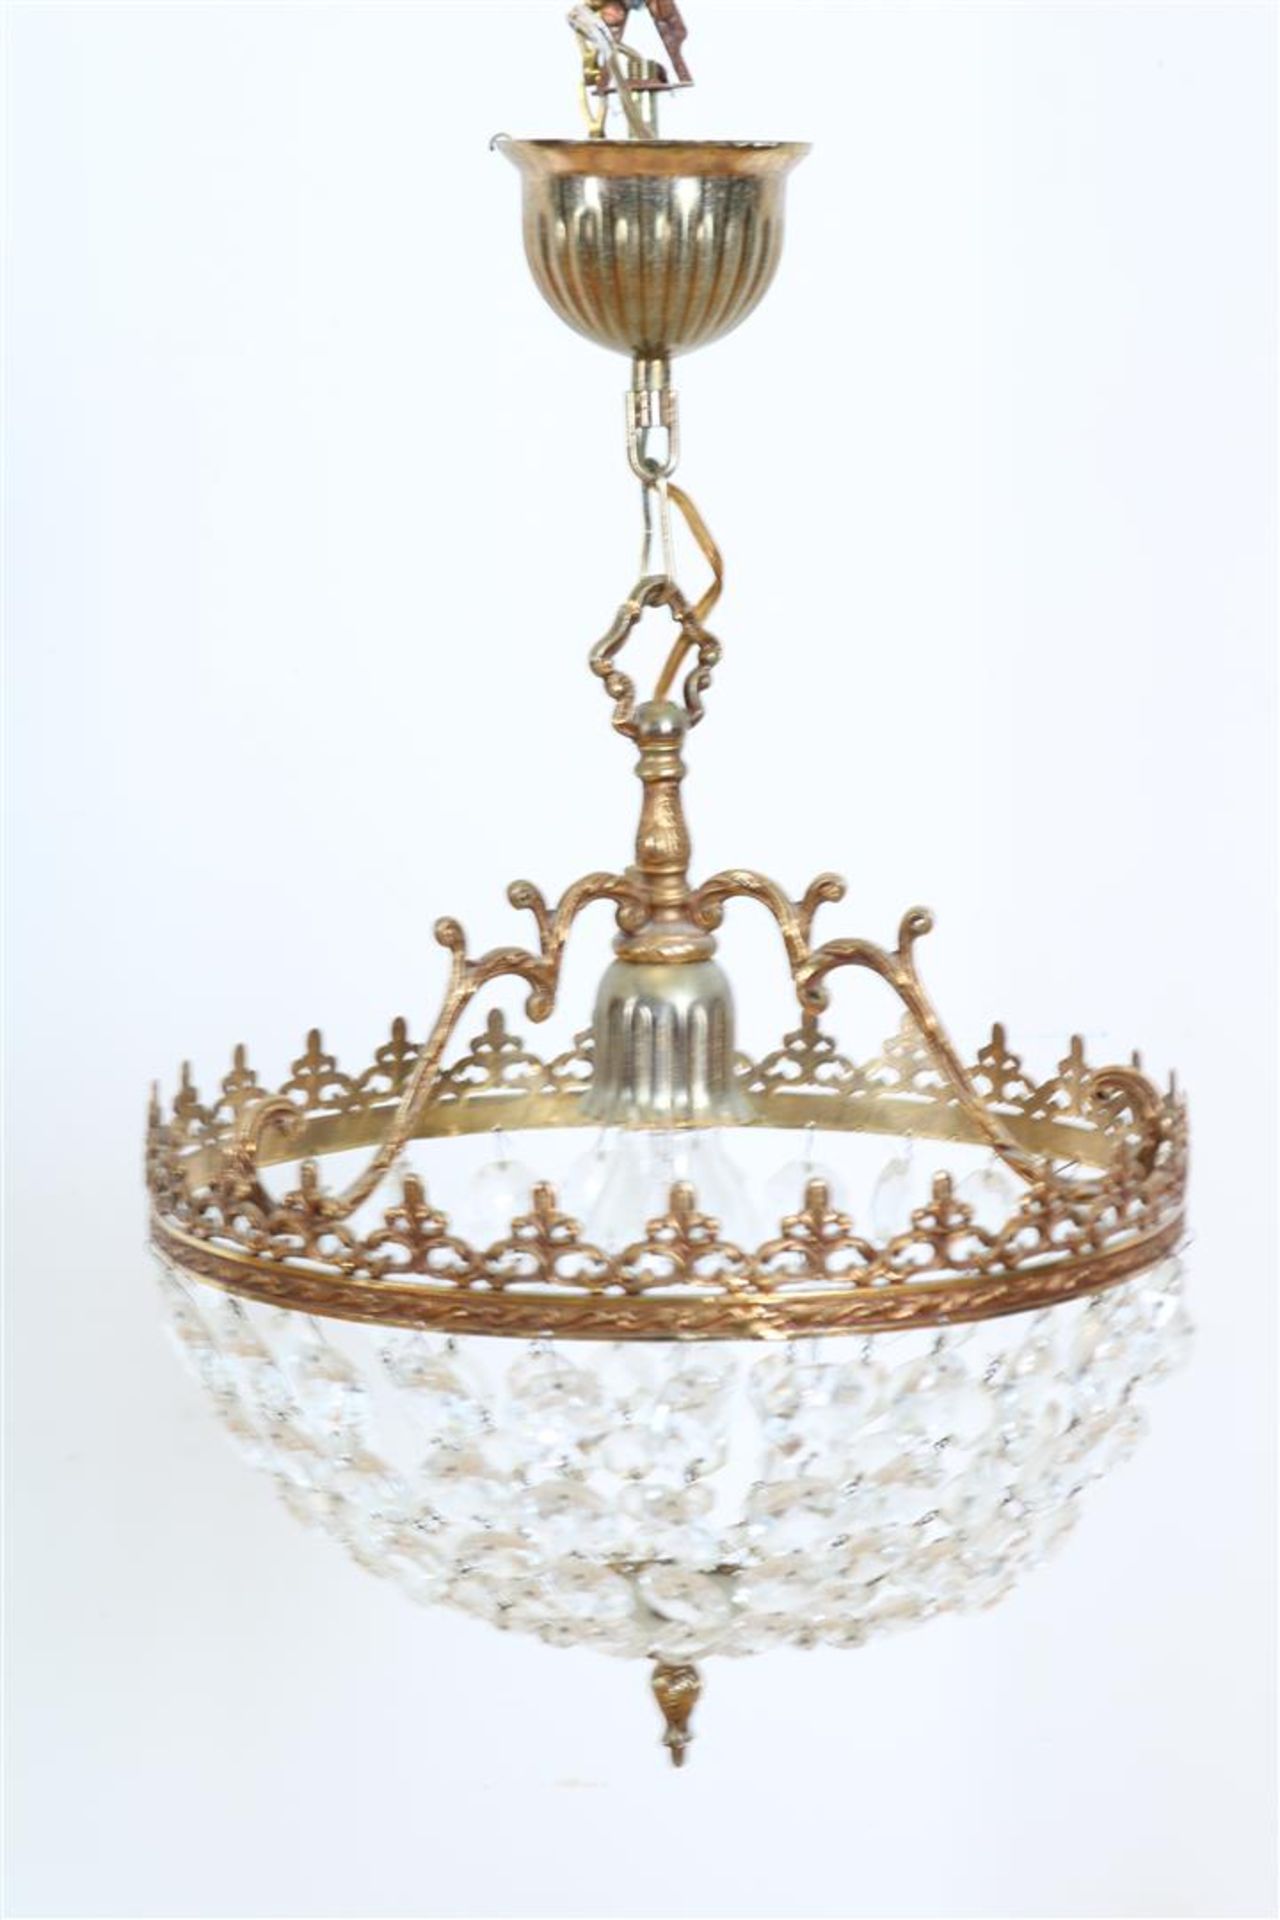 Chandelier with crystal drops.